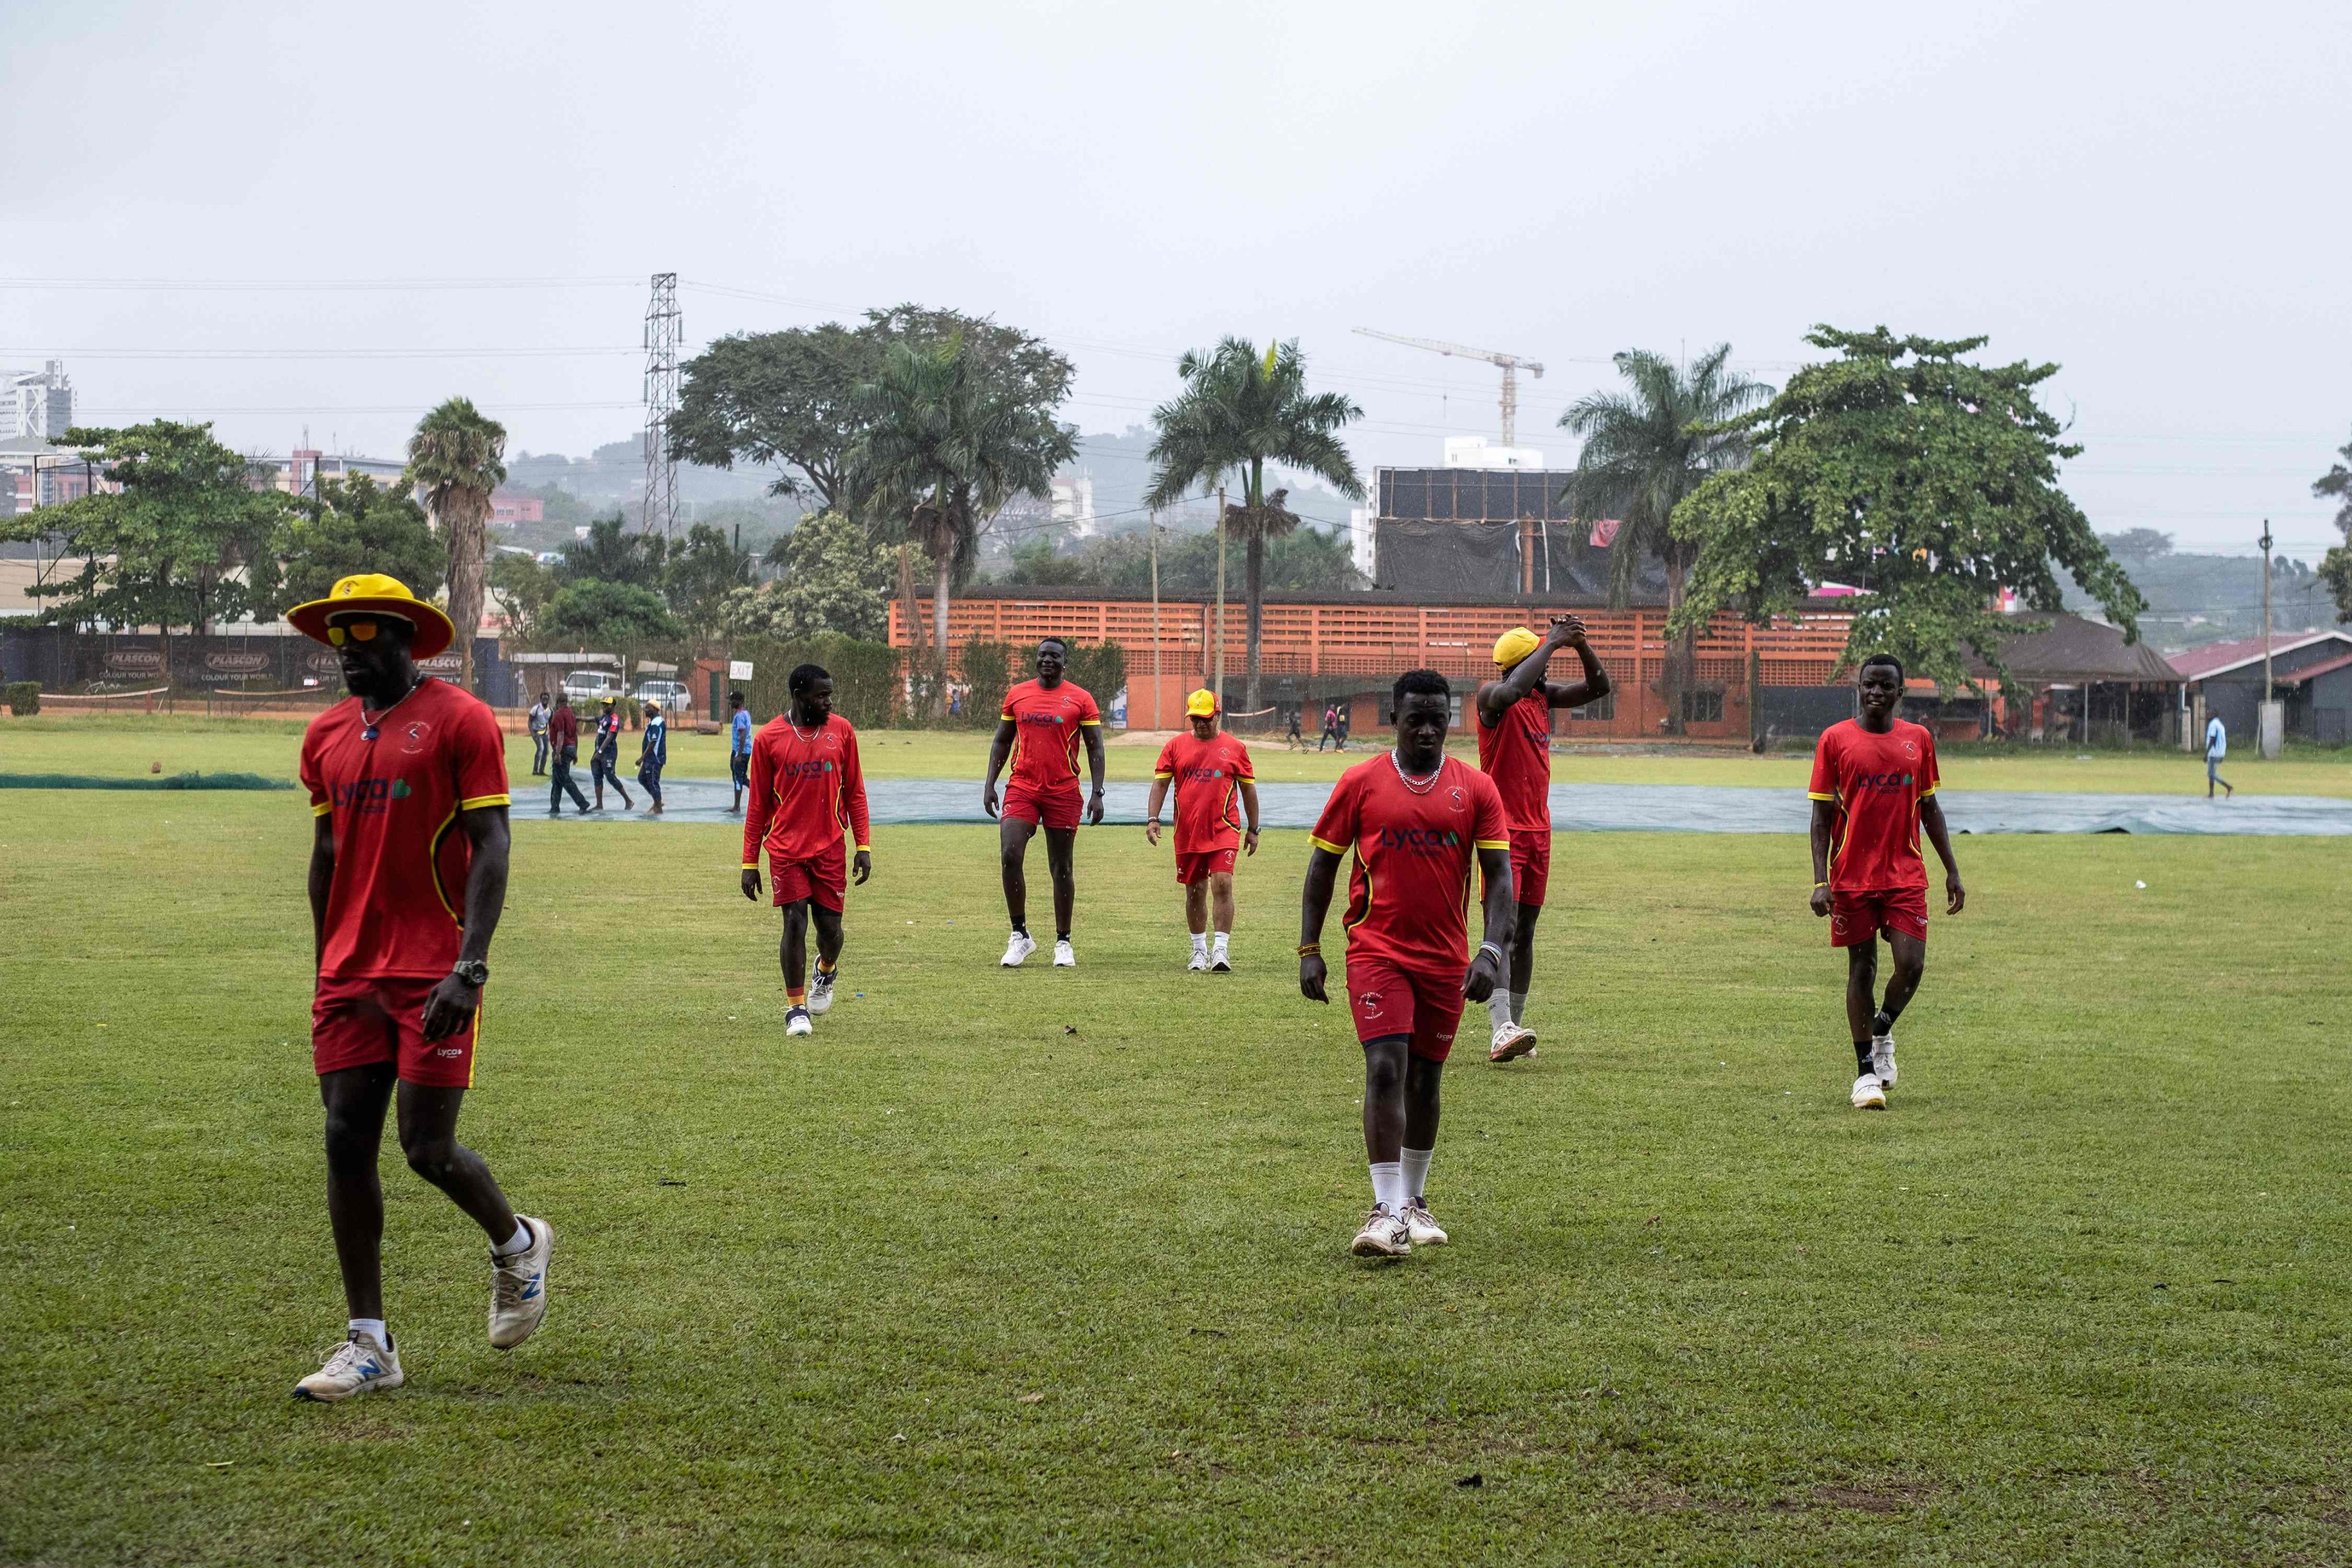 Uganda’s national cricketers are preparing to compete in the World Cup for the first time in their history. Photo: AFP